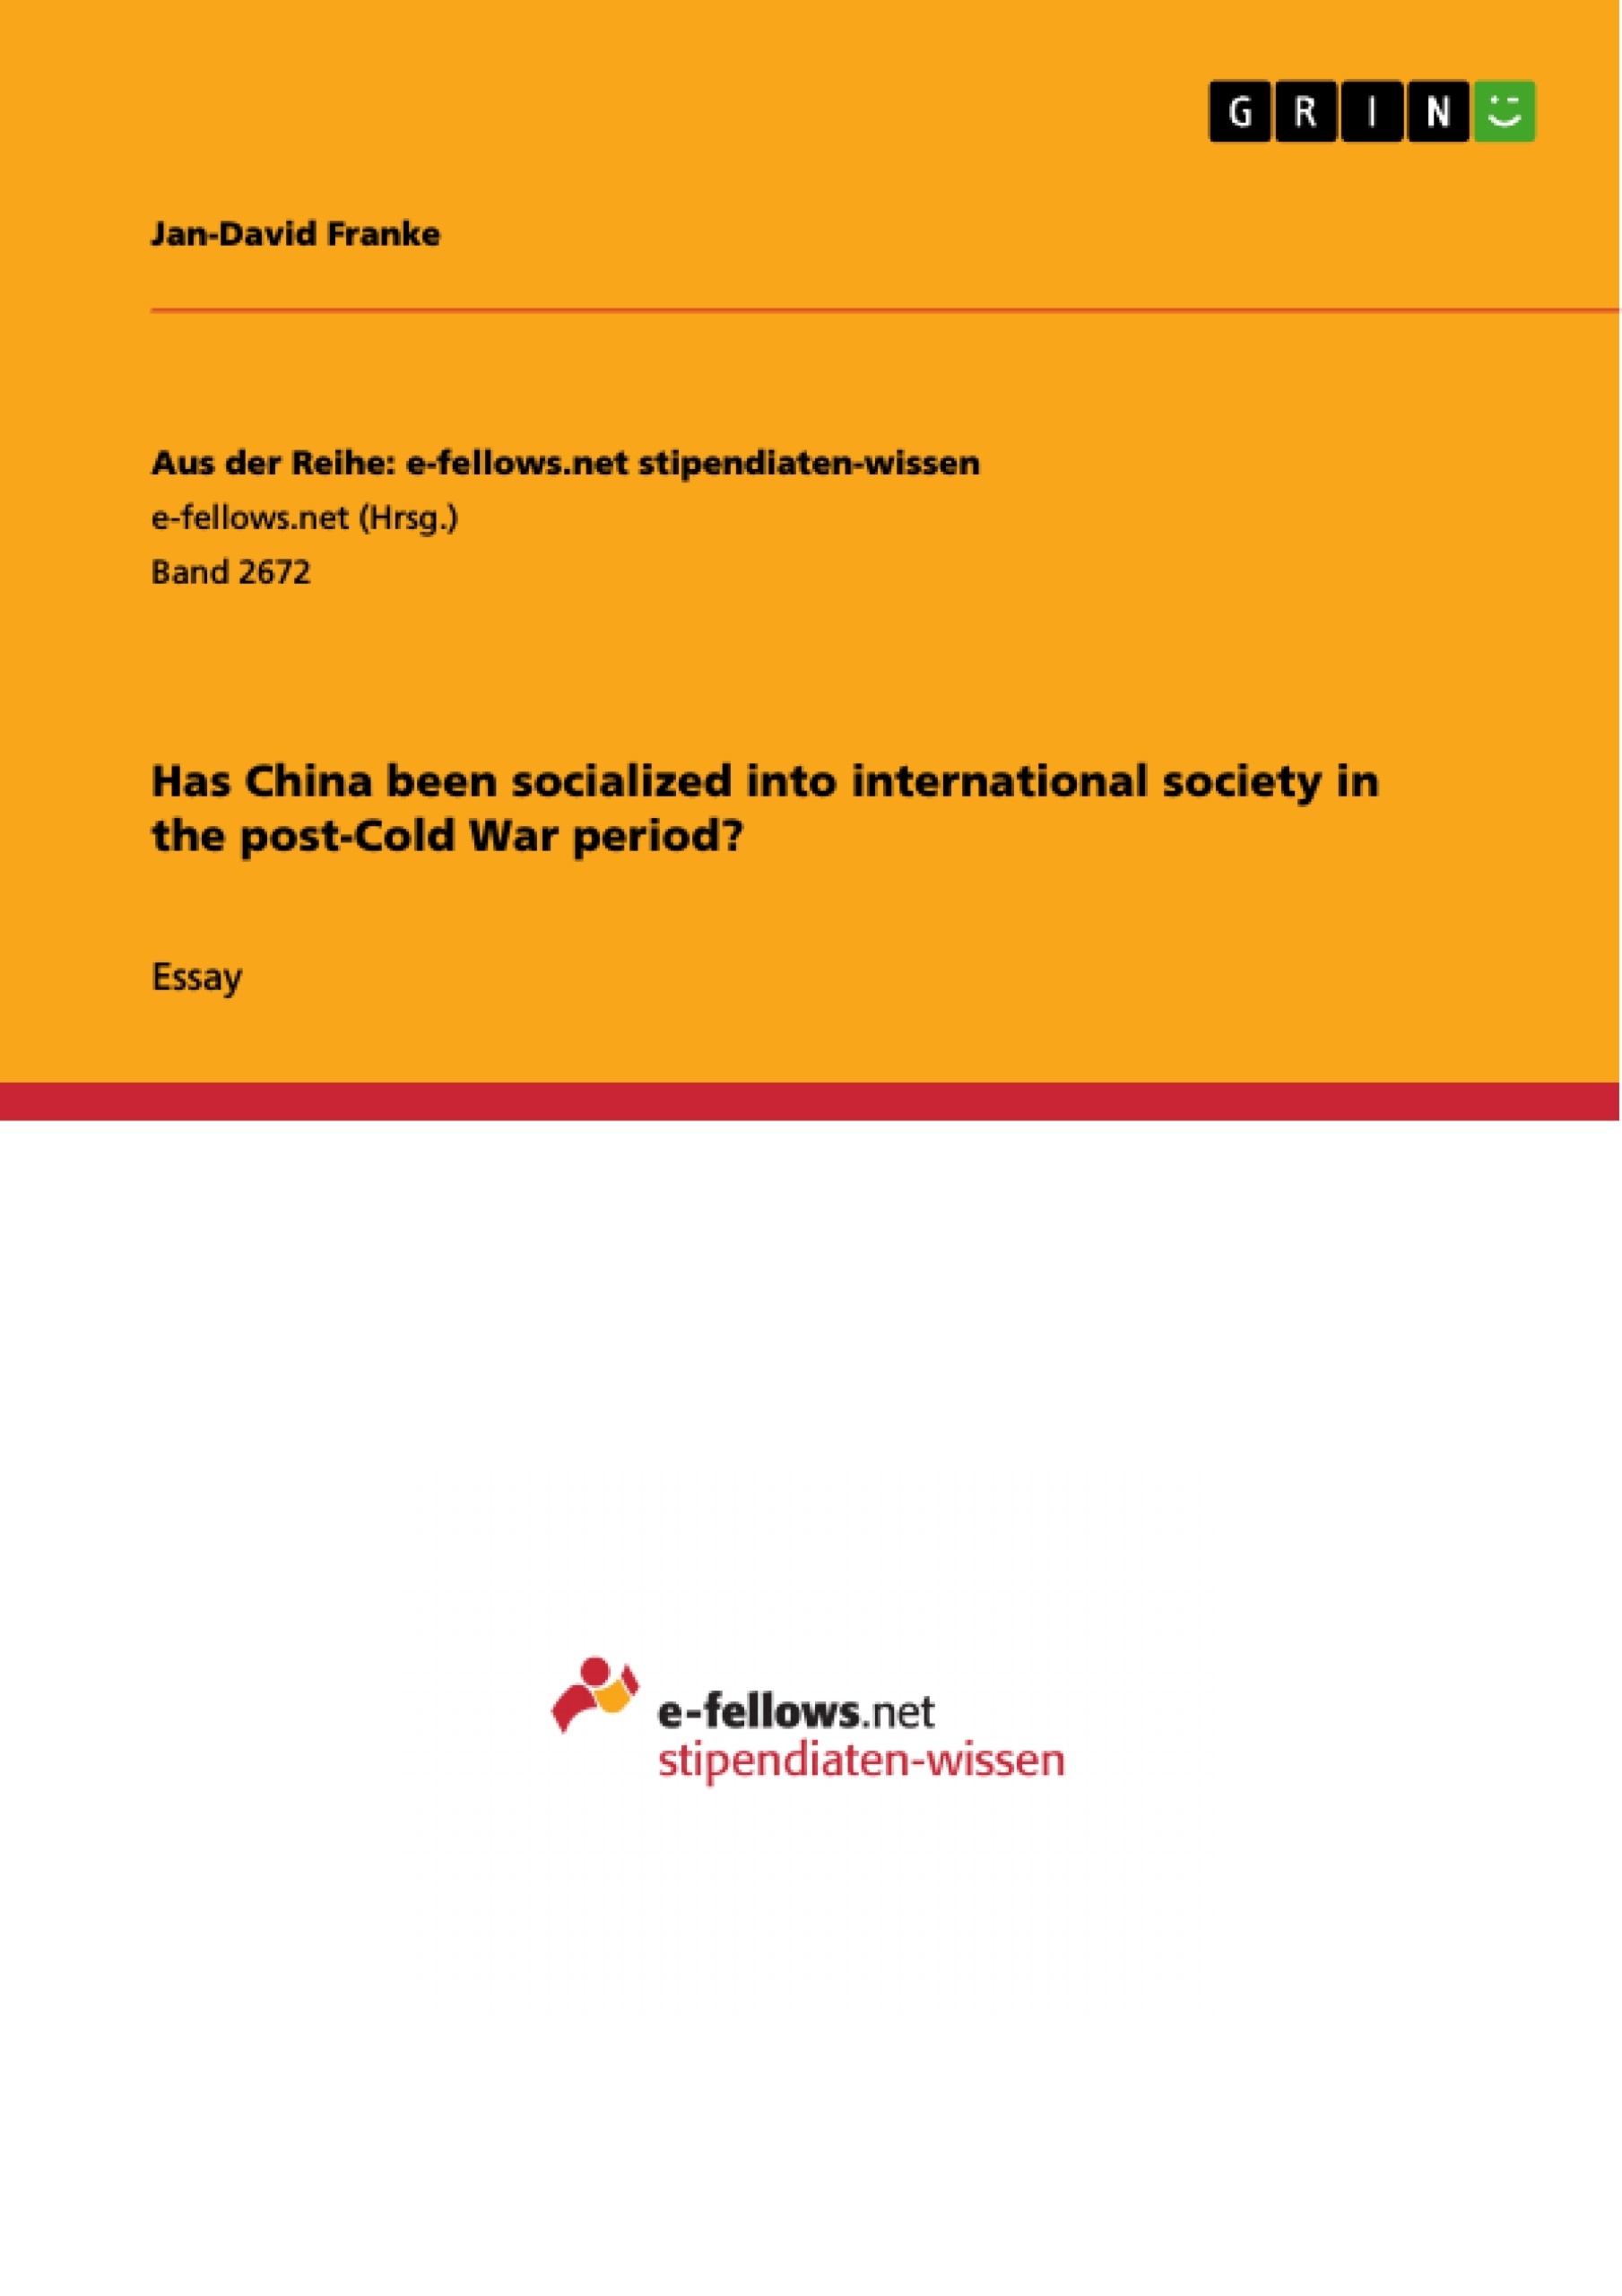 Titel: Has China been socialized into international society in the post-Cold War period?